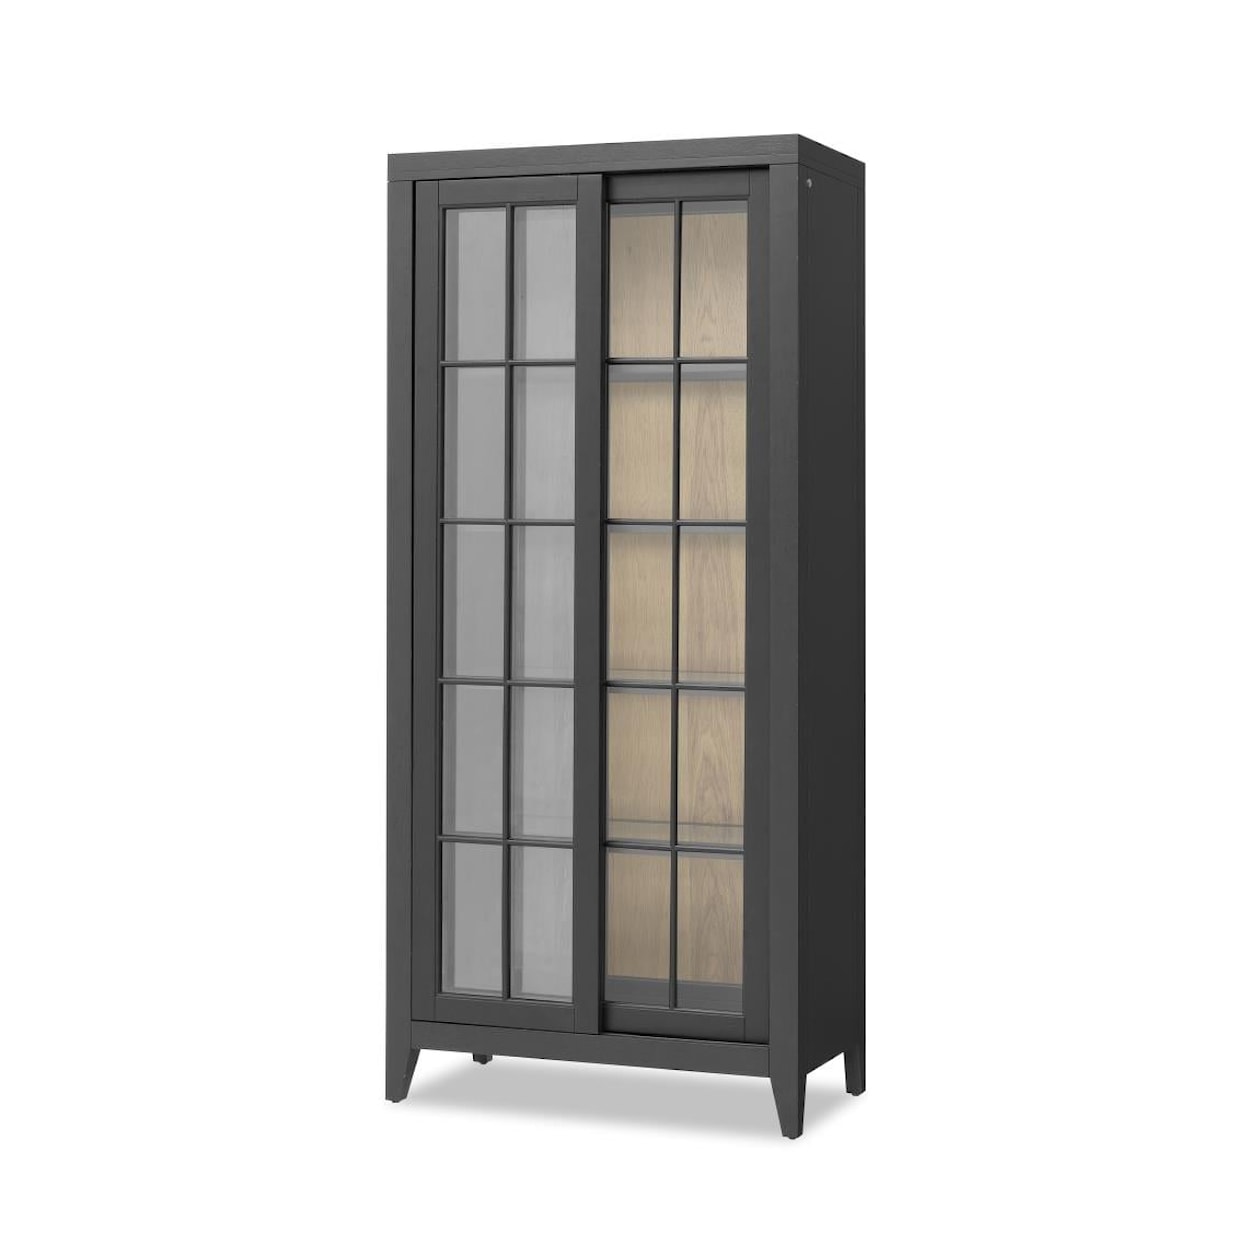 Trisha Yearwood Home Collection by Legacy Classic Today's Traditions Sliding Door Display Cabinet